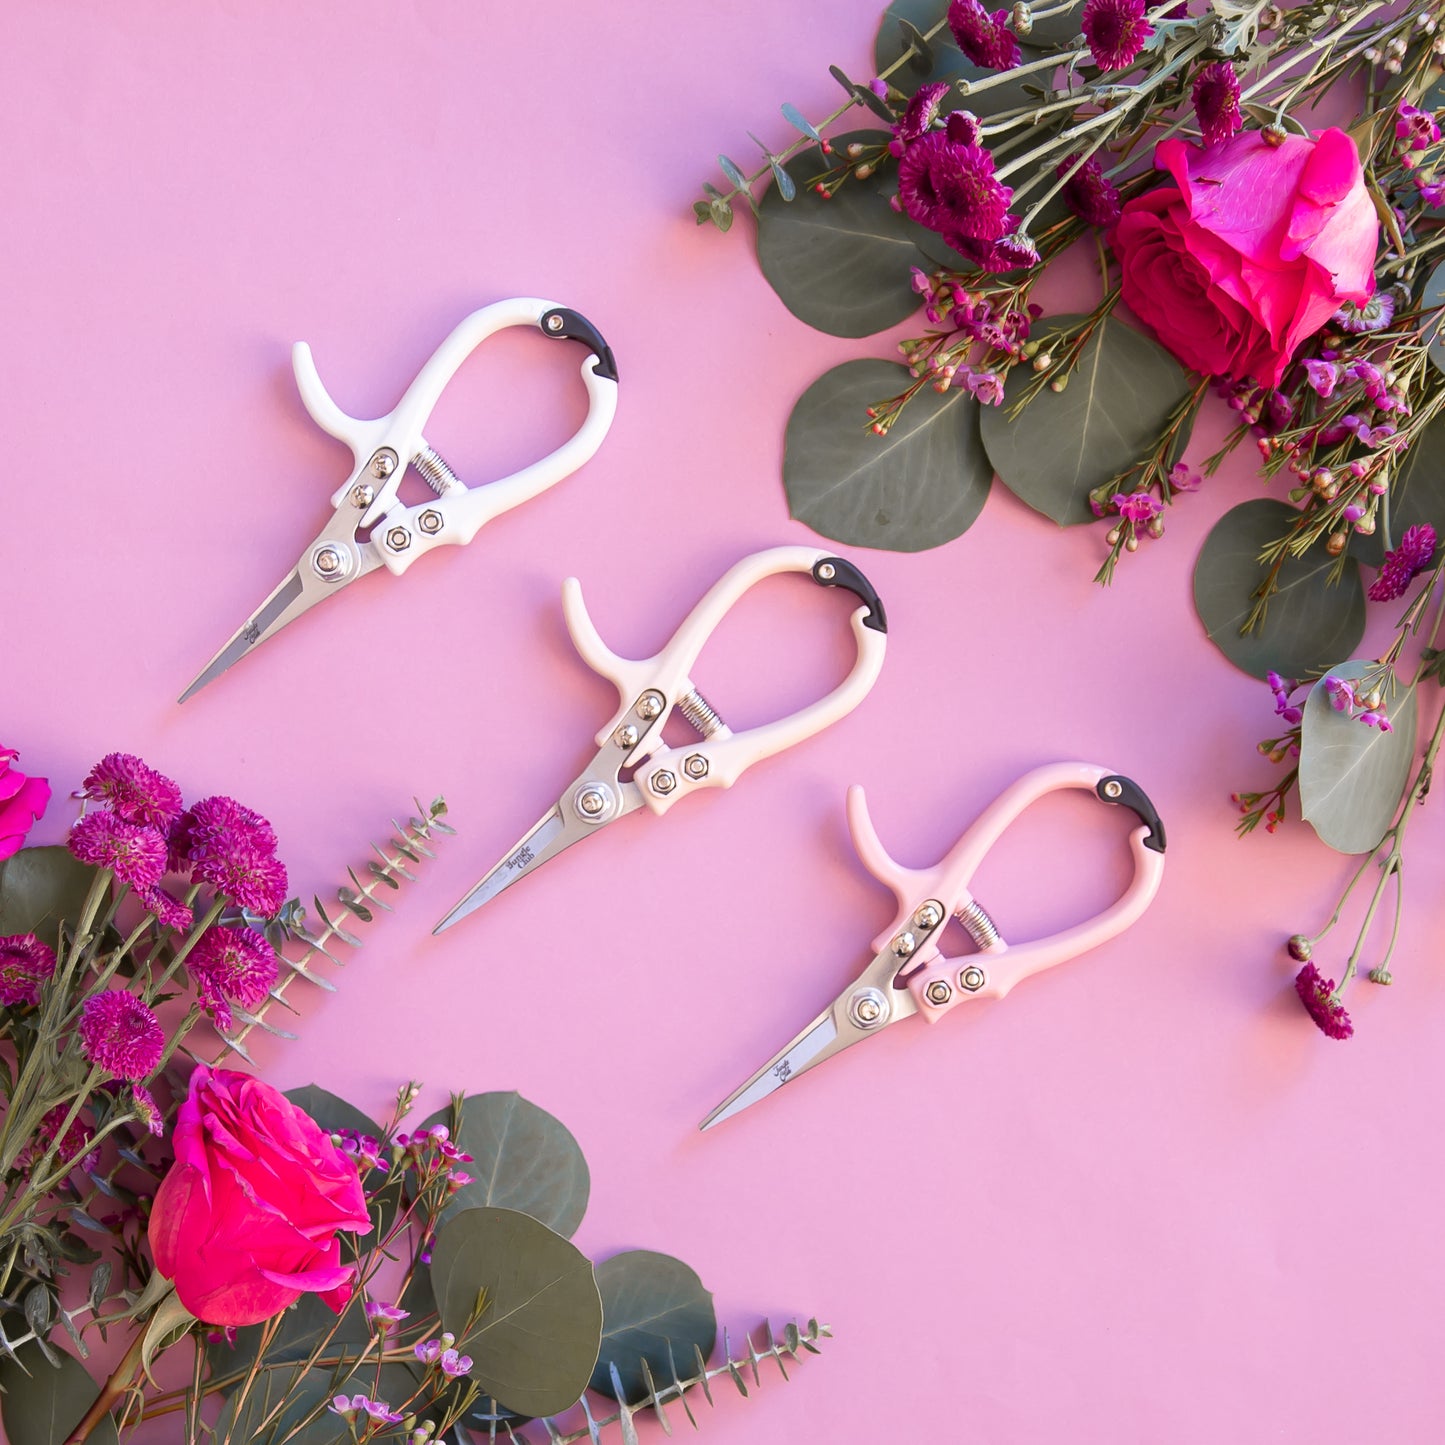 On a pink background is the three color ways of pruning shears next to bouquets of flowers.